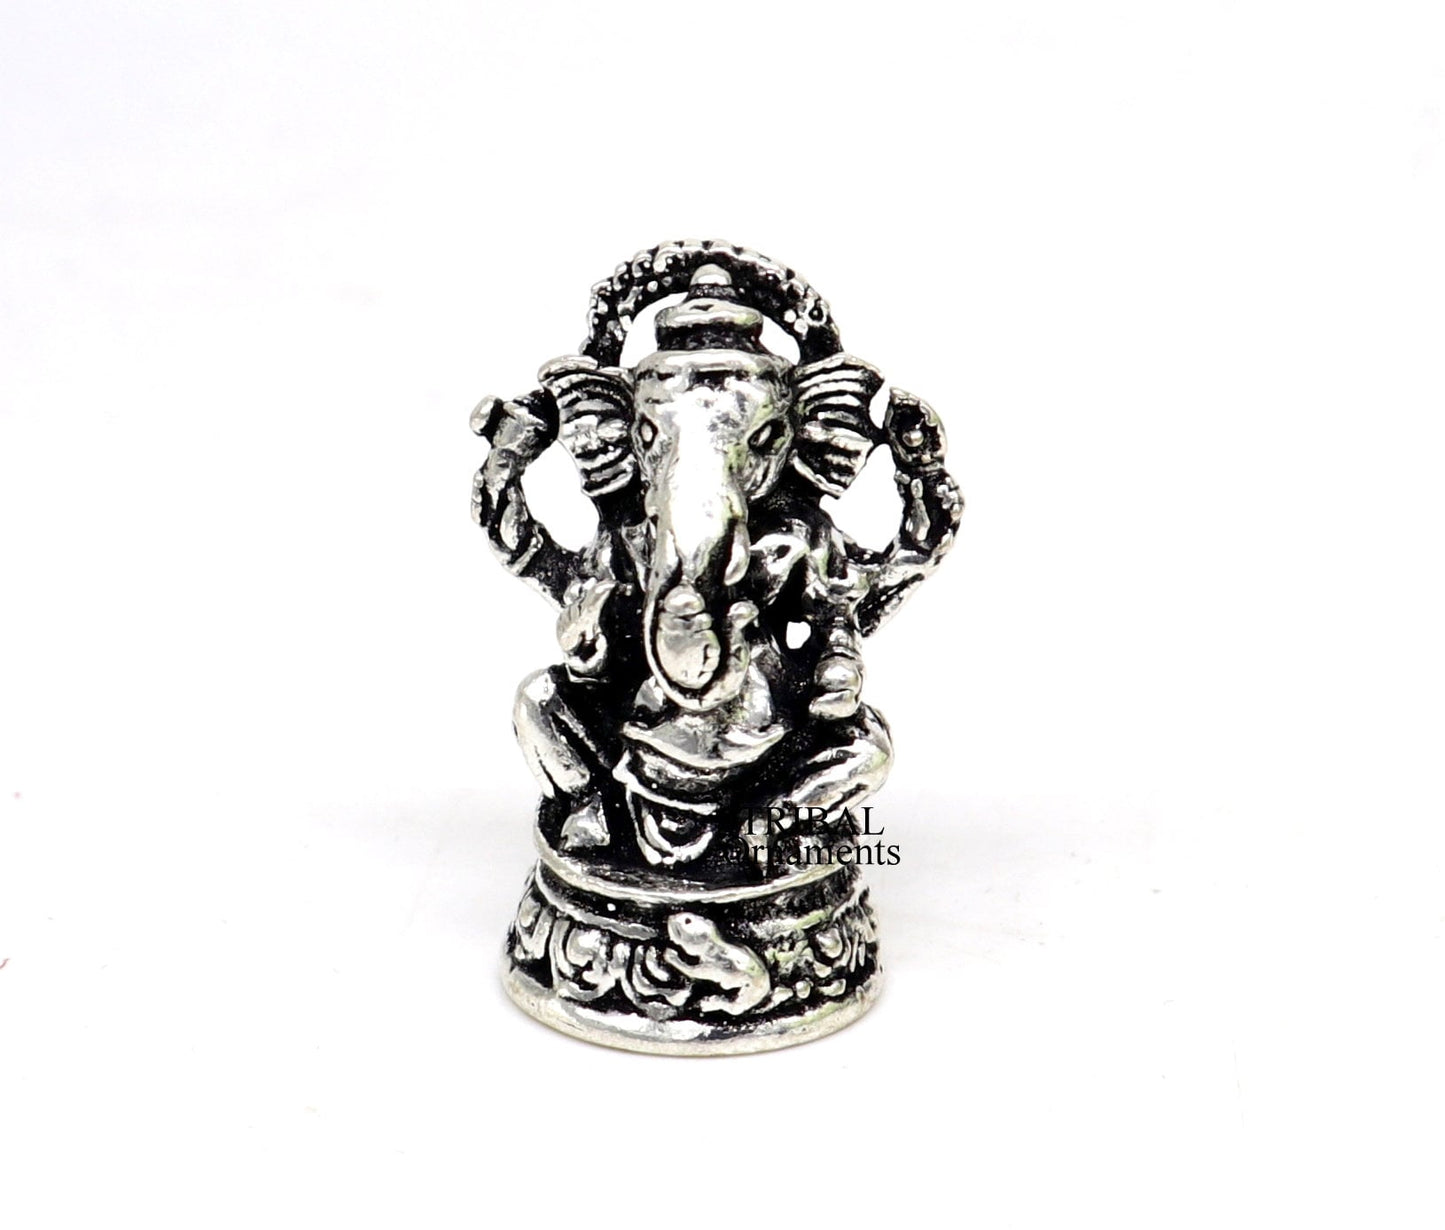 925 Sterling silver Lord Ganesh Idol small statue Figurine, handcrafted Lord Ganesh statue sculpture Diwali puja gift art503 - TRIBAL ORNAMENTS